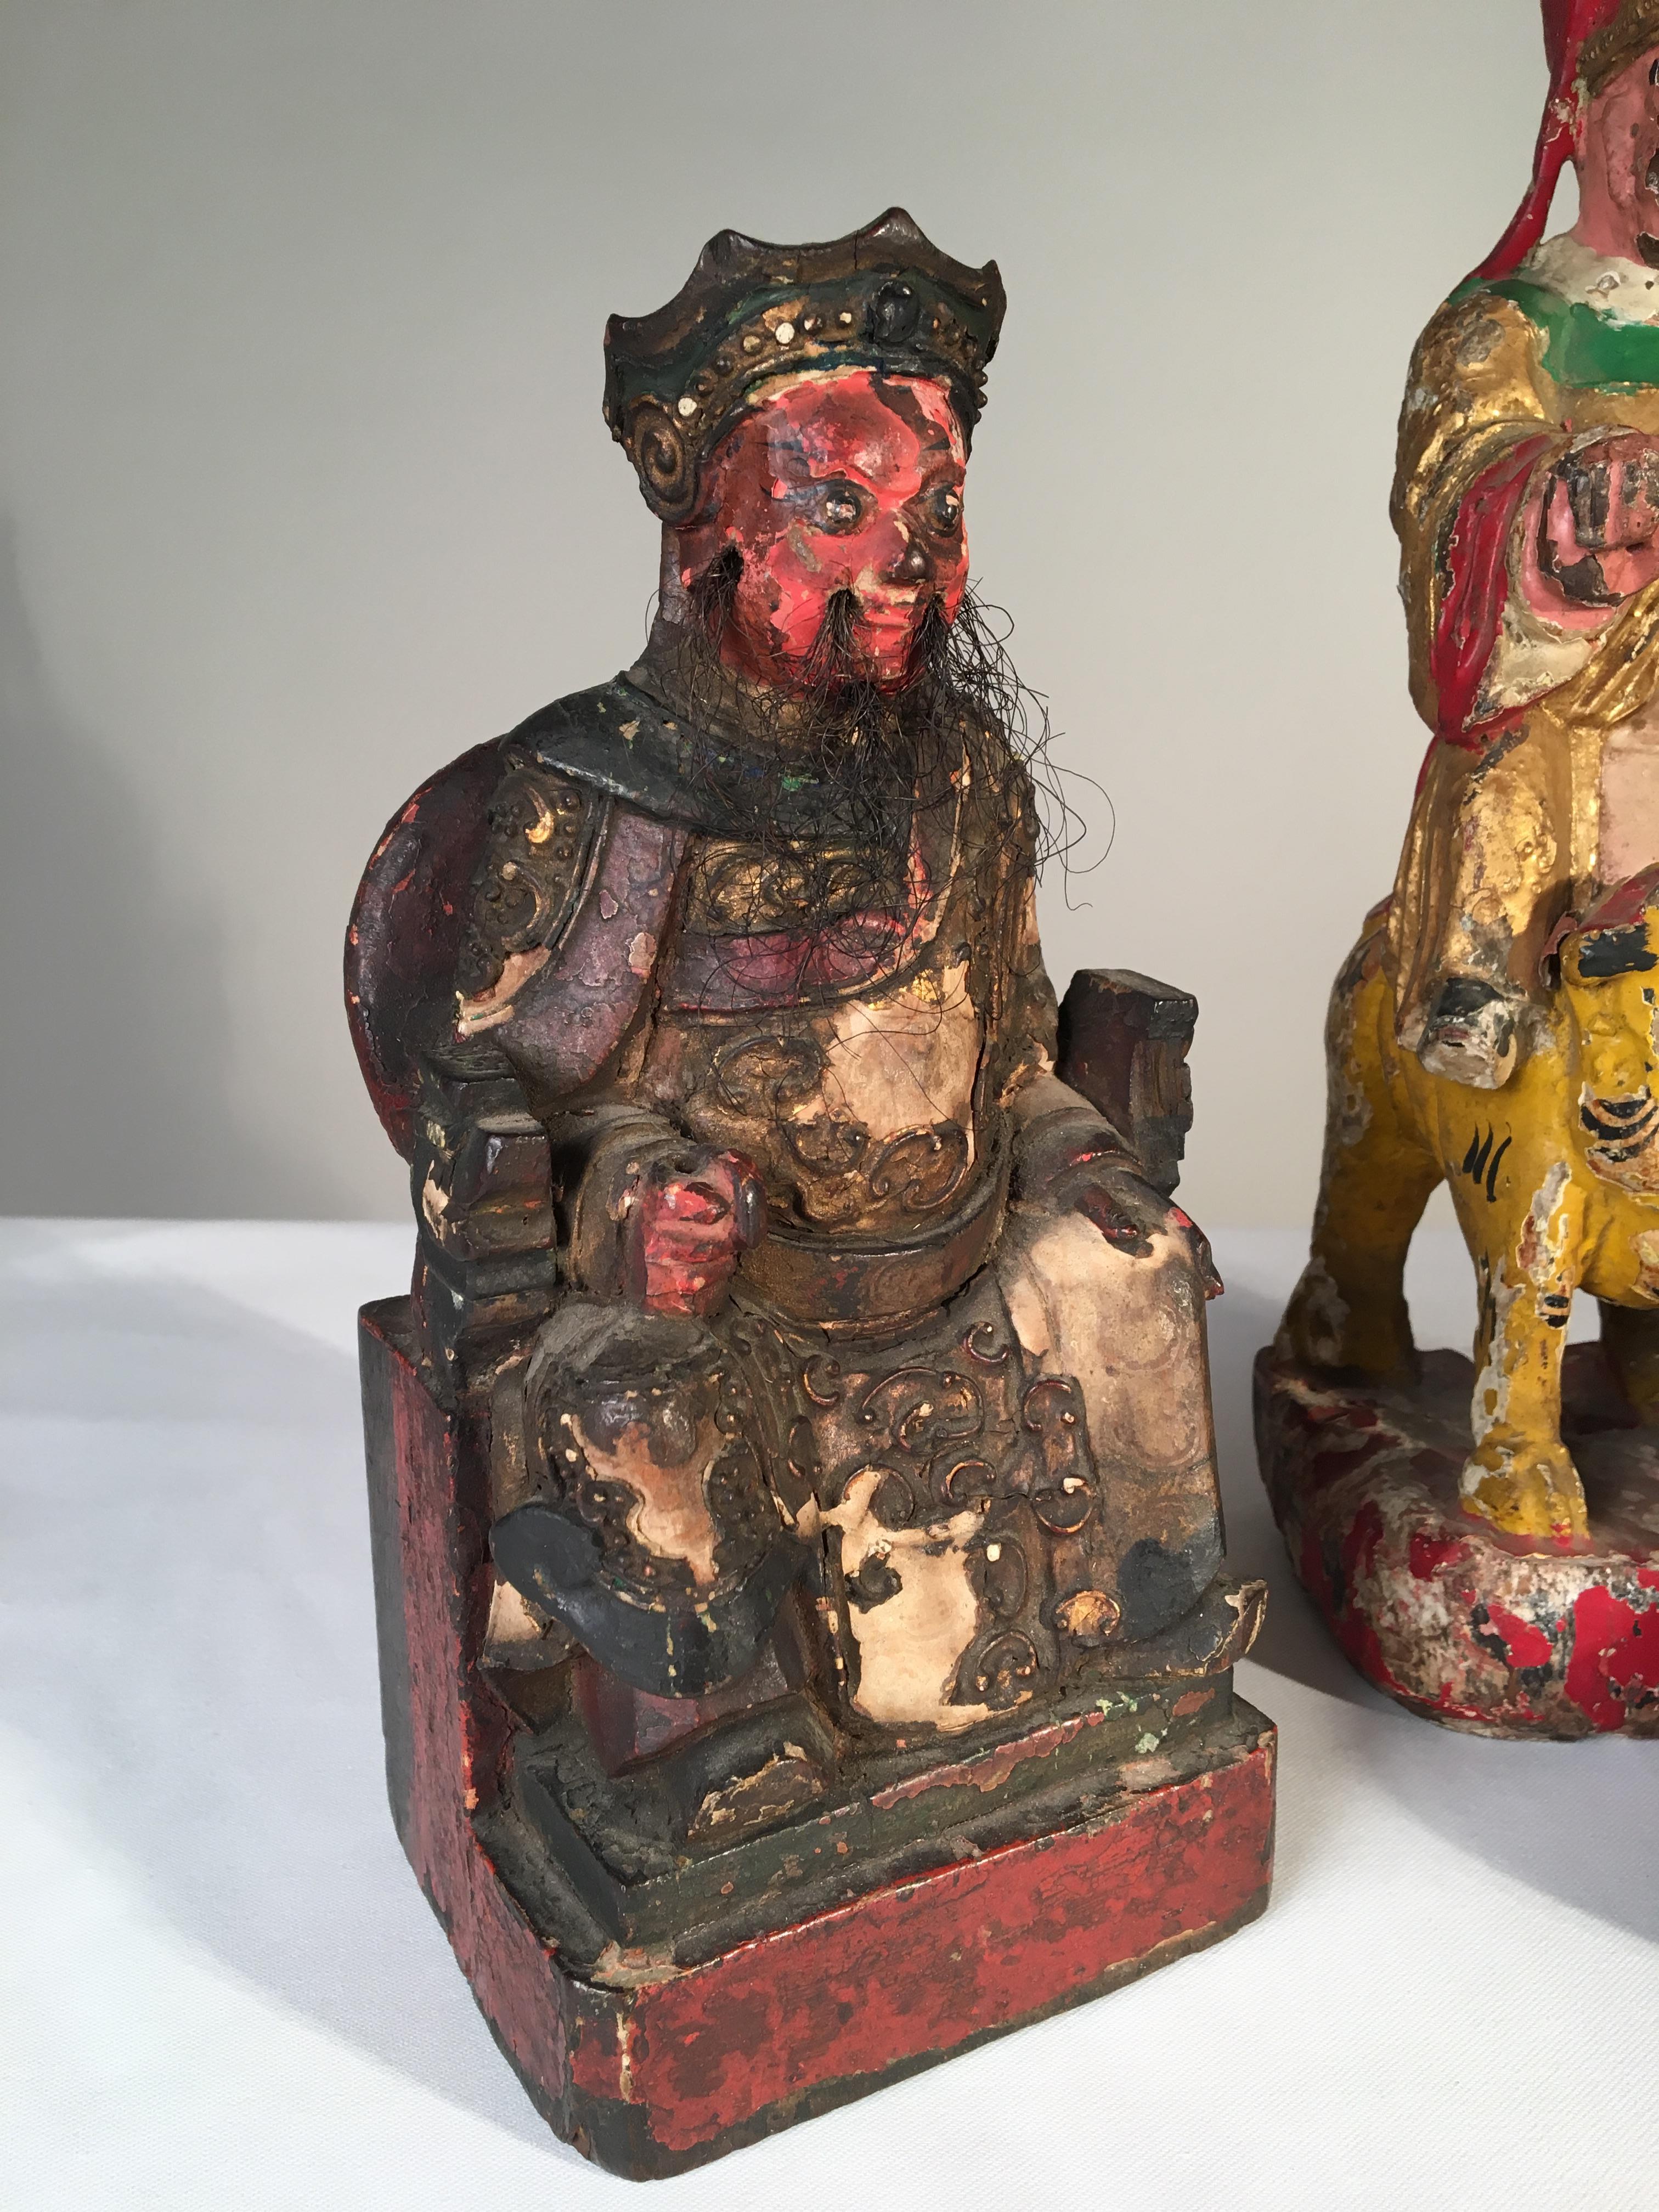 A collection of Folk Art carved figurines depicting Asian religious figures including Chang Tao-ling riding a tiger, seated Confucius, and a seated Buddha.